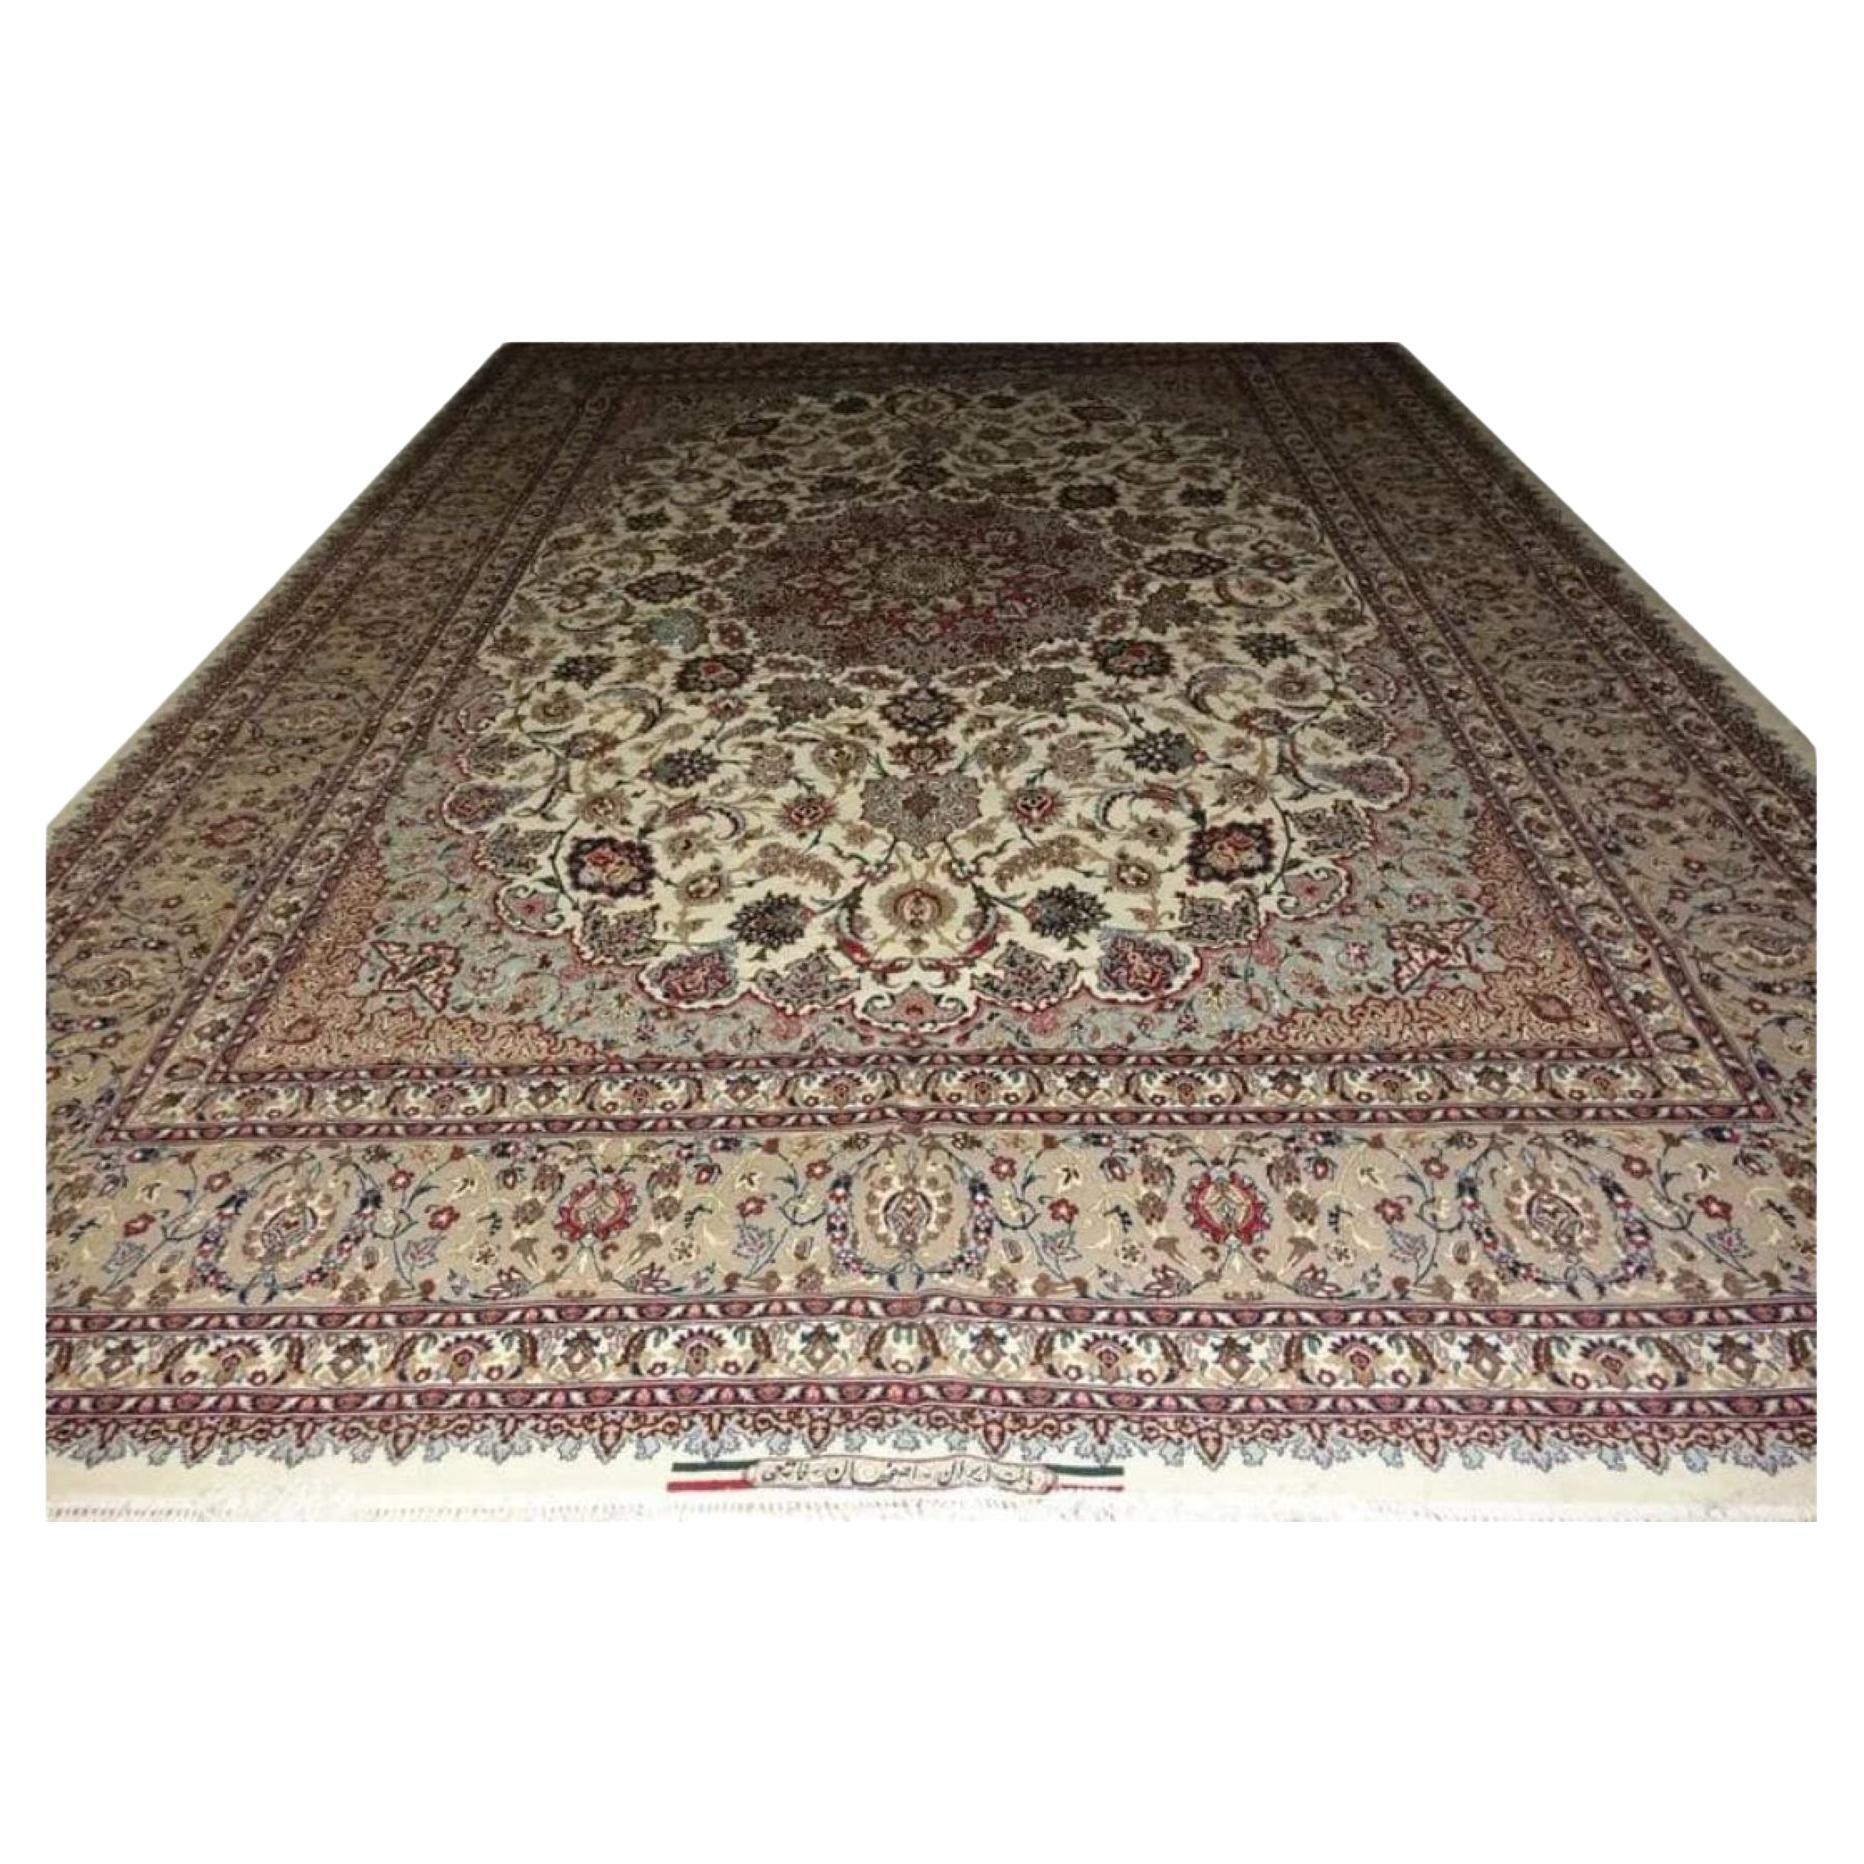 Very fine Persian Isfahan Silk & Wool Rug - 10' x 13' For Sale